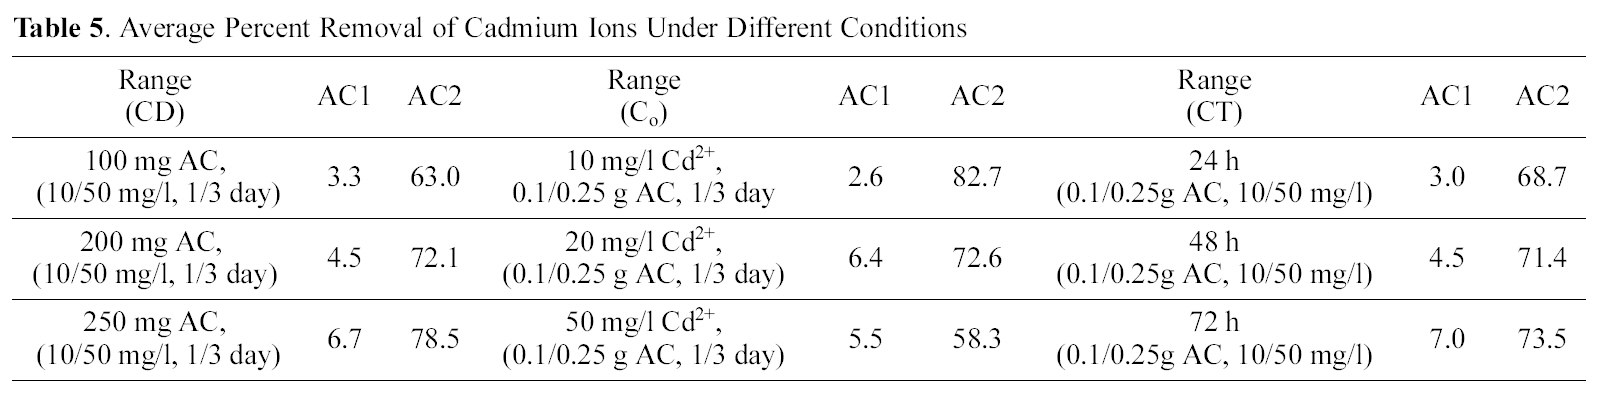 Average Percent Removal of Cadmium Ions Under Different Conditions